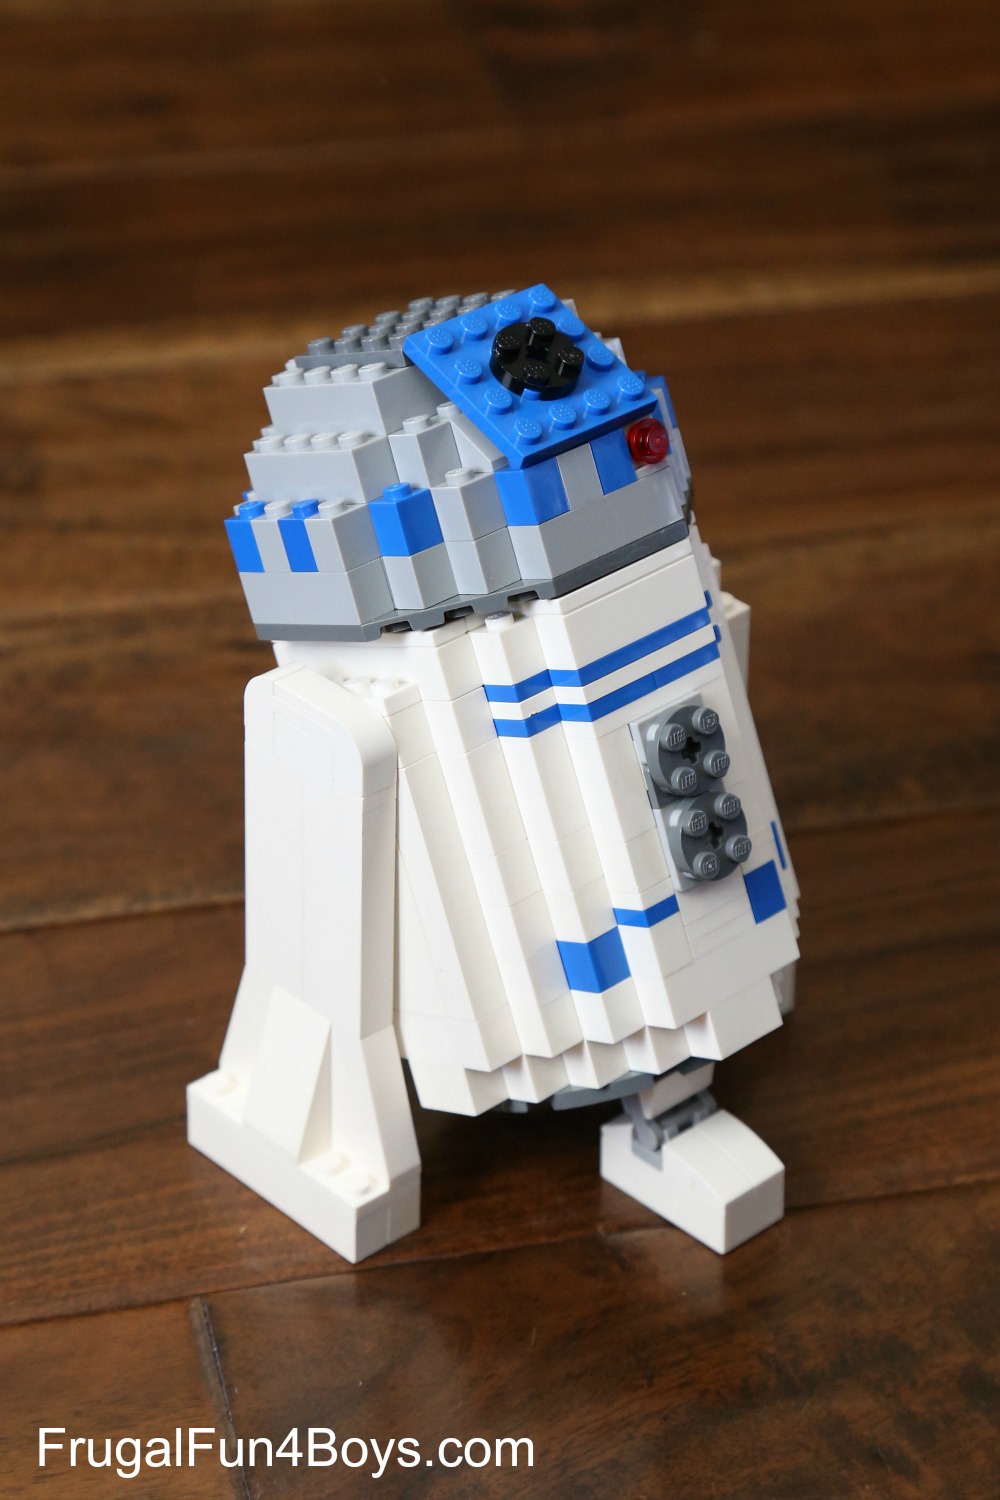 How to Build a LEGO R2-D2